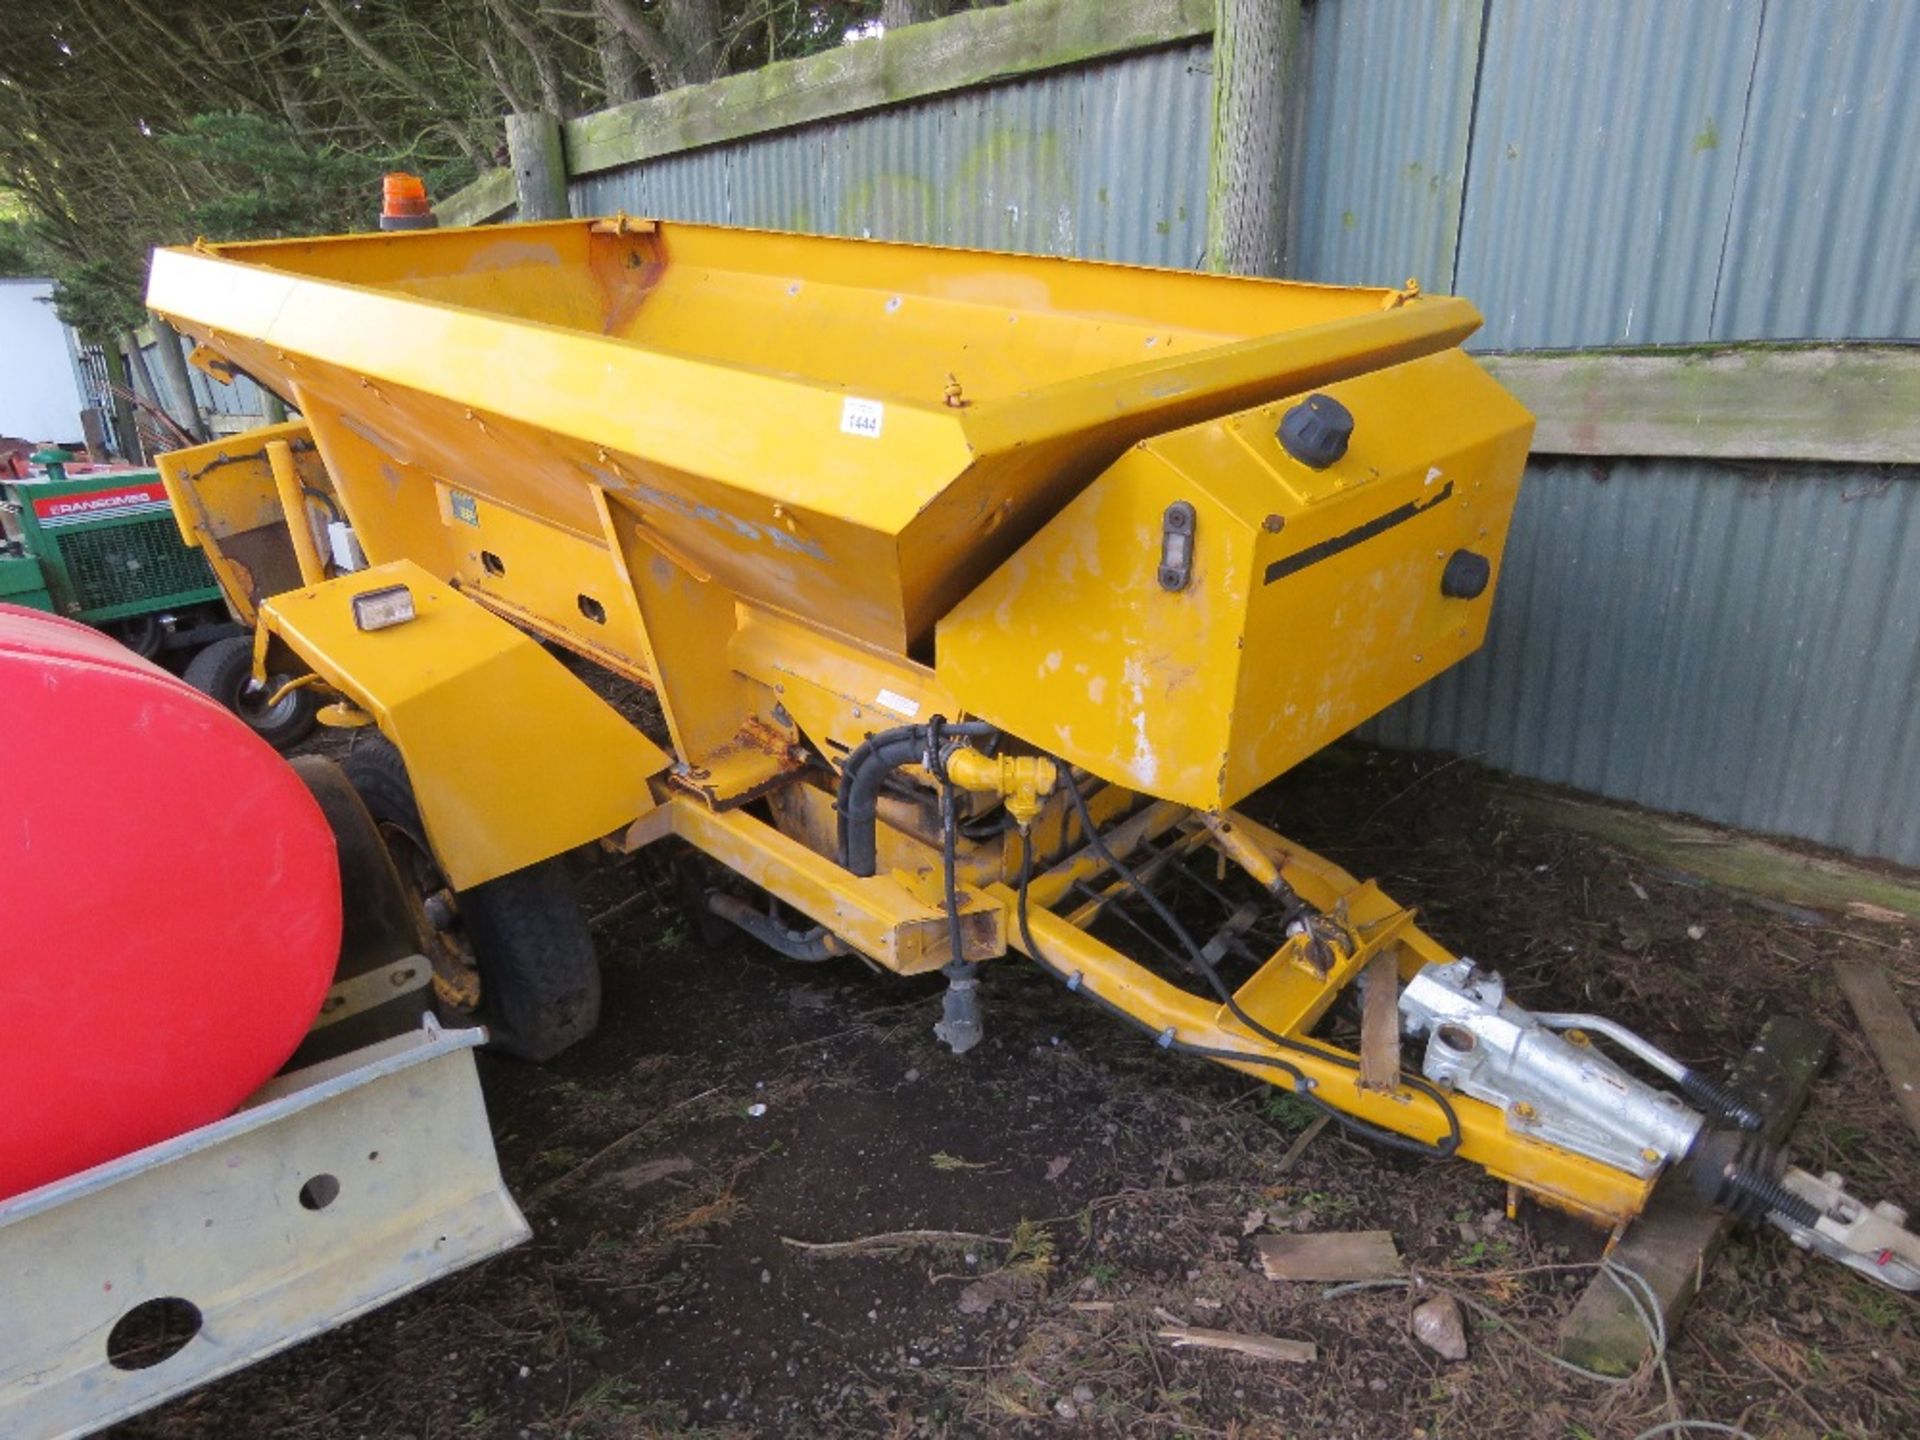 CHARITY LOT!! ECON SINGLE AXLED TOWED SALT SPREADER WITH WHEEL DRIVEN HYDRAULIC SYSTEM. UNUSED FOR